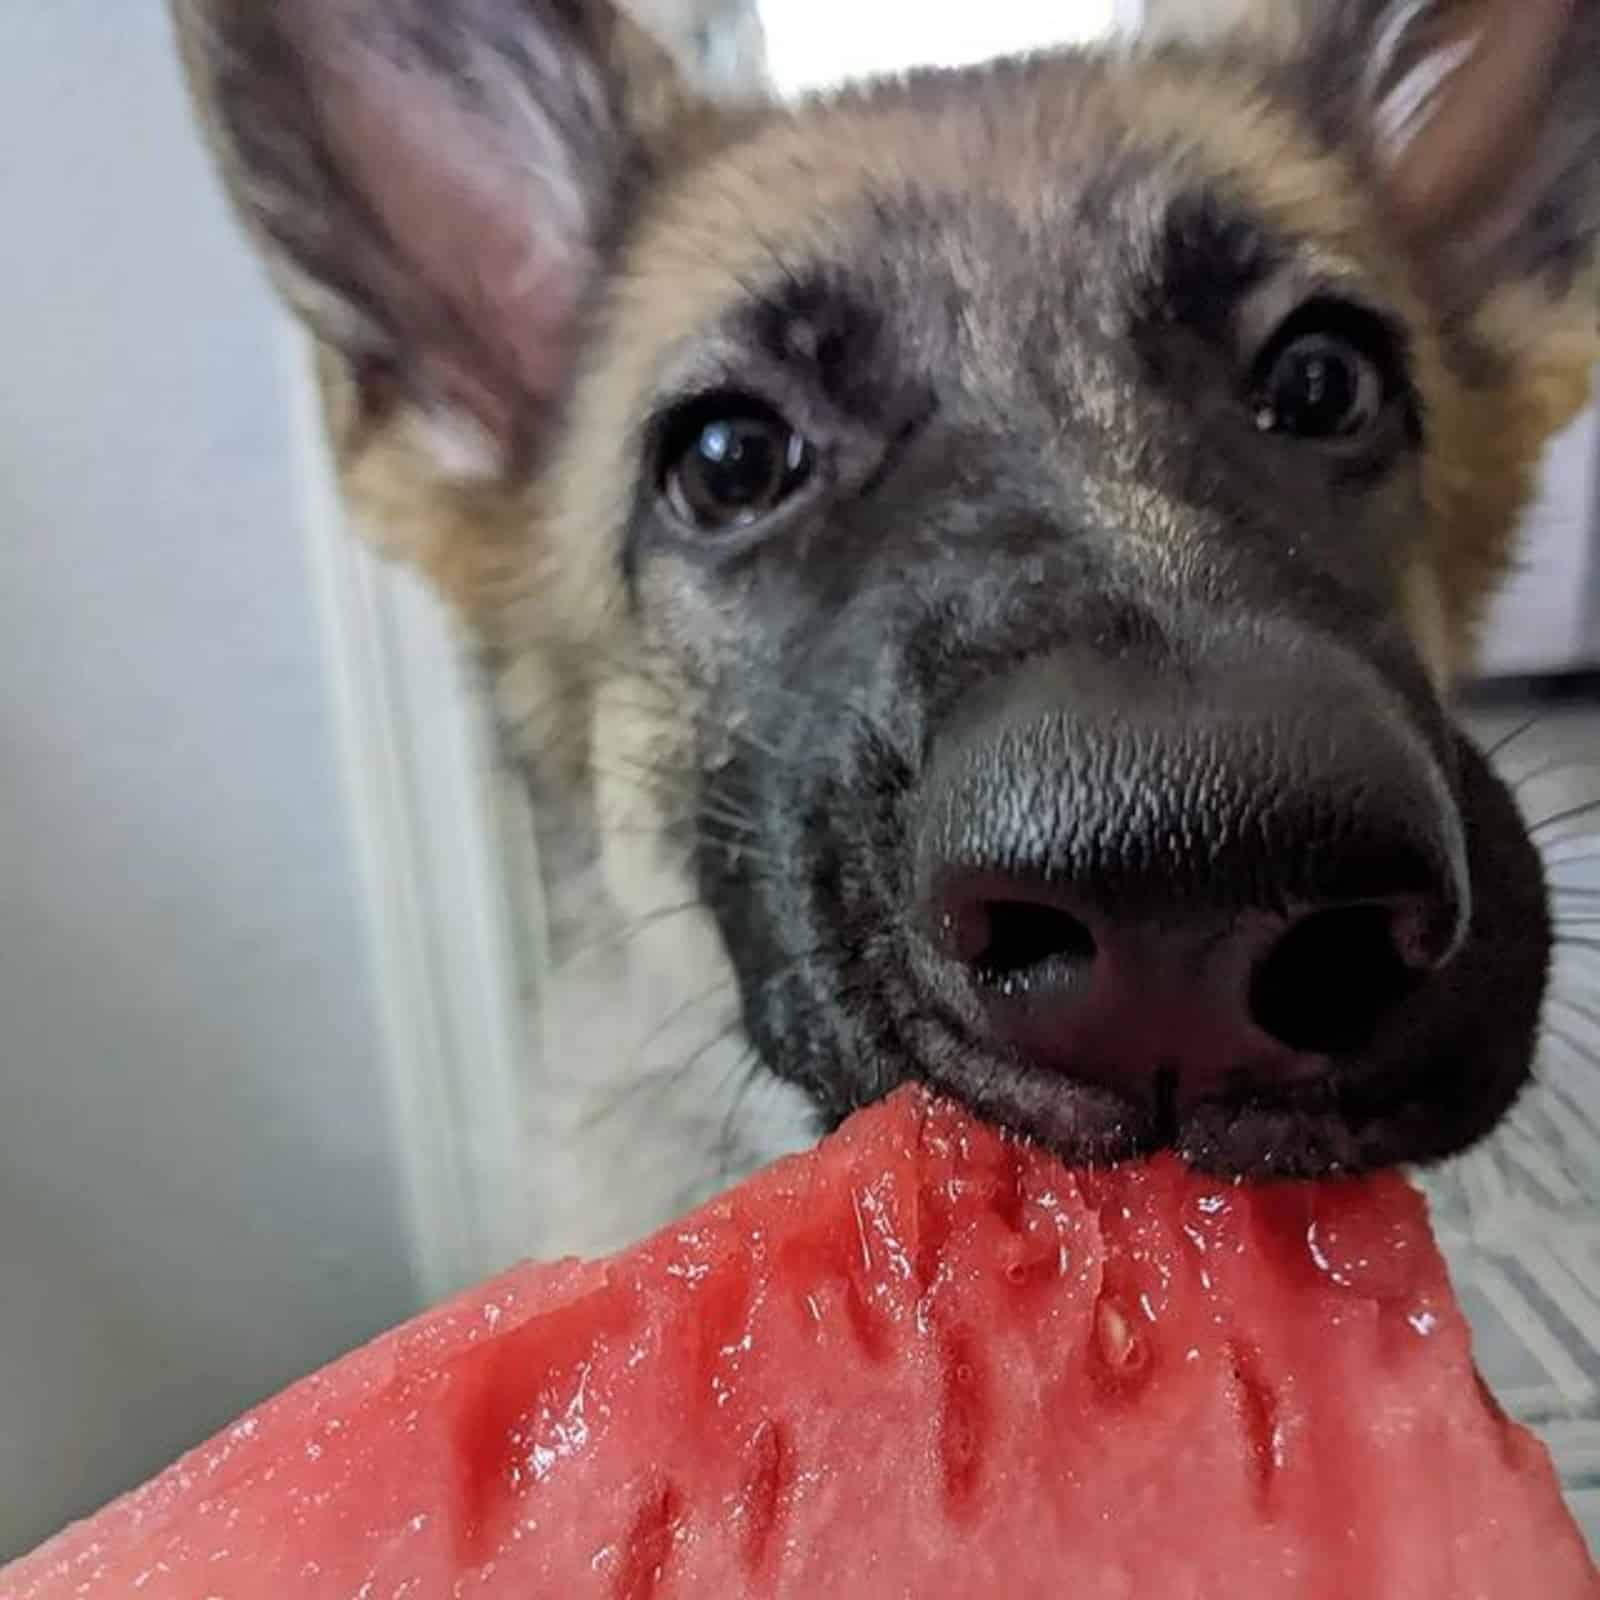 sable german shepherd dog eating watermelon from owner's hand